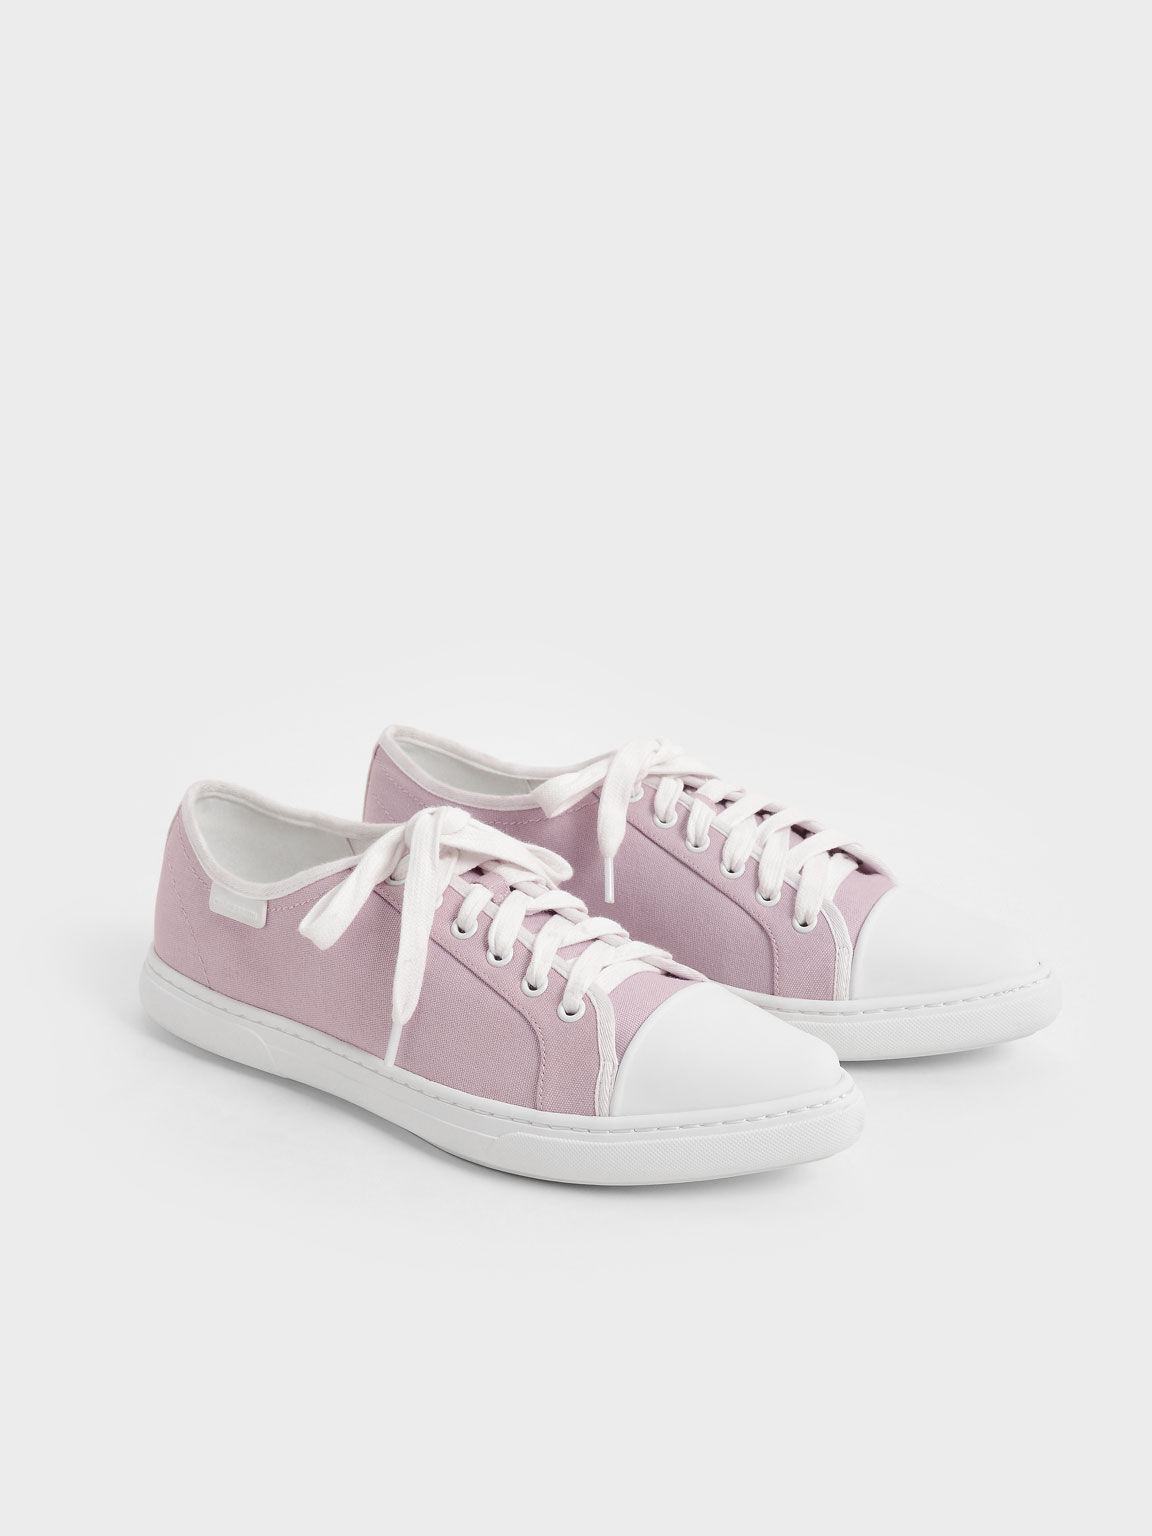 pointed toe sneakers for ladies